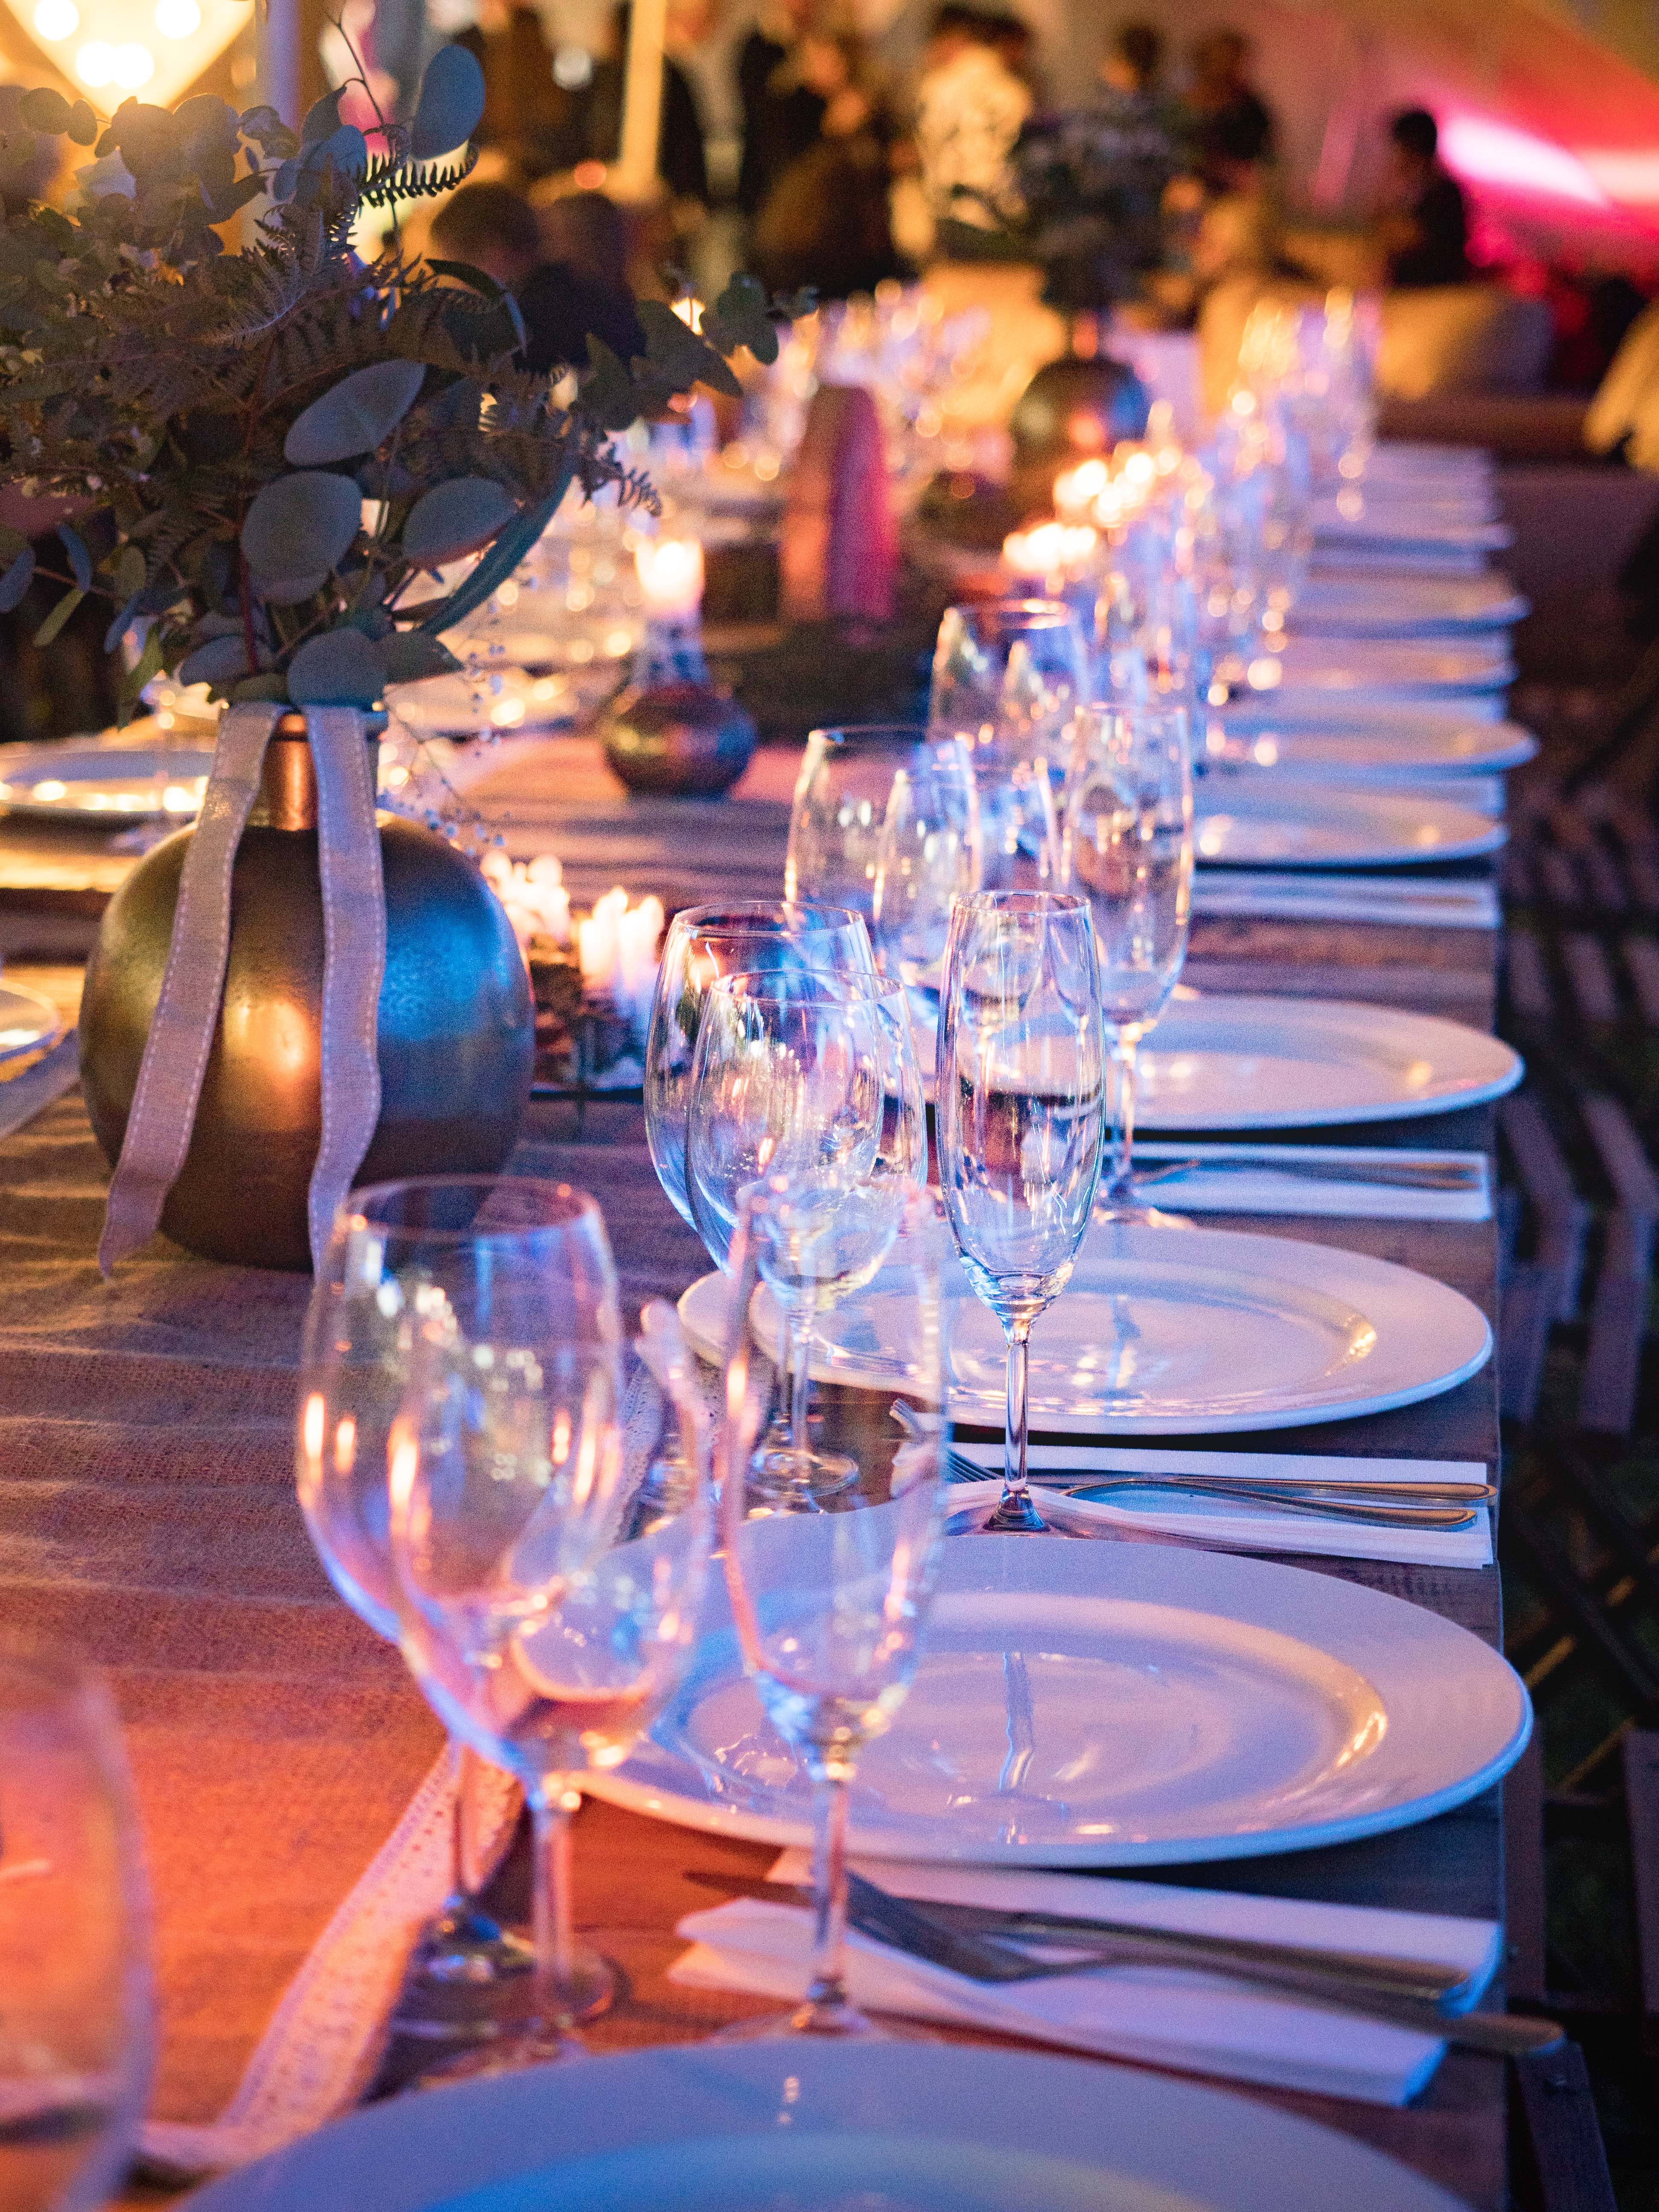 banquet-candle-catering-1114425.jpg